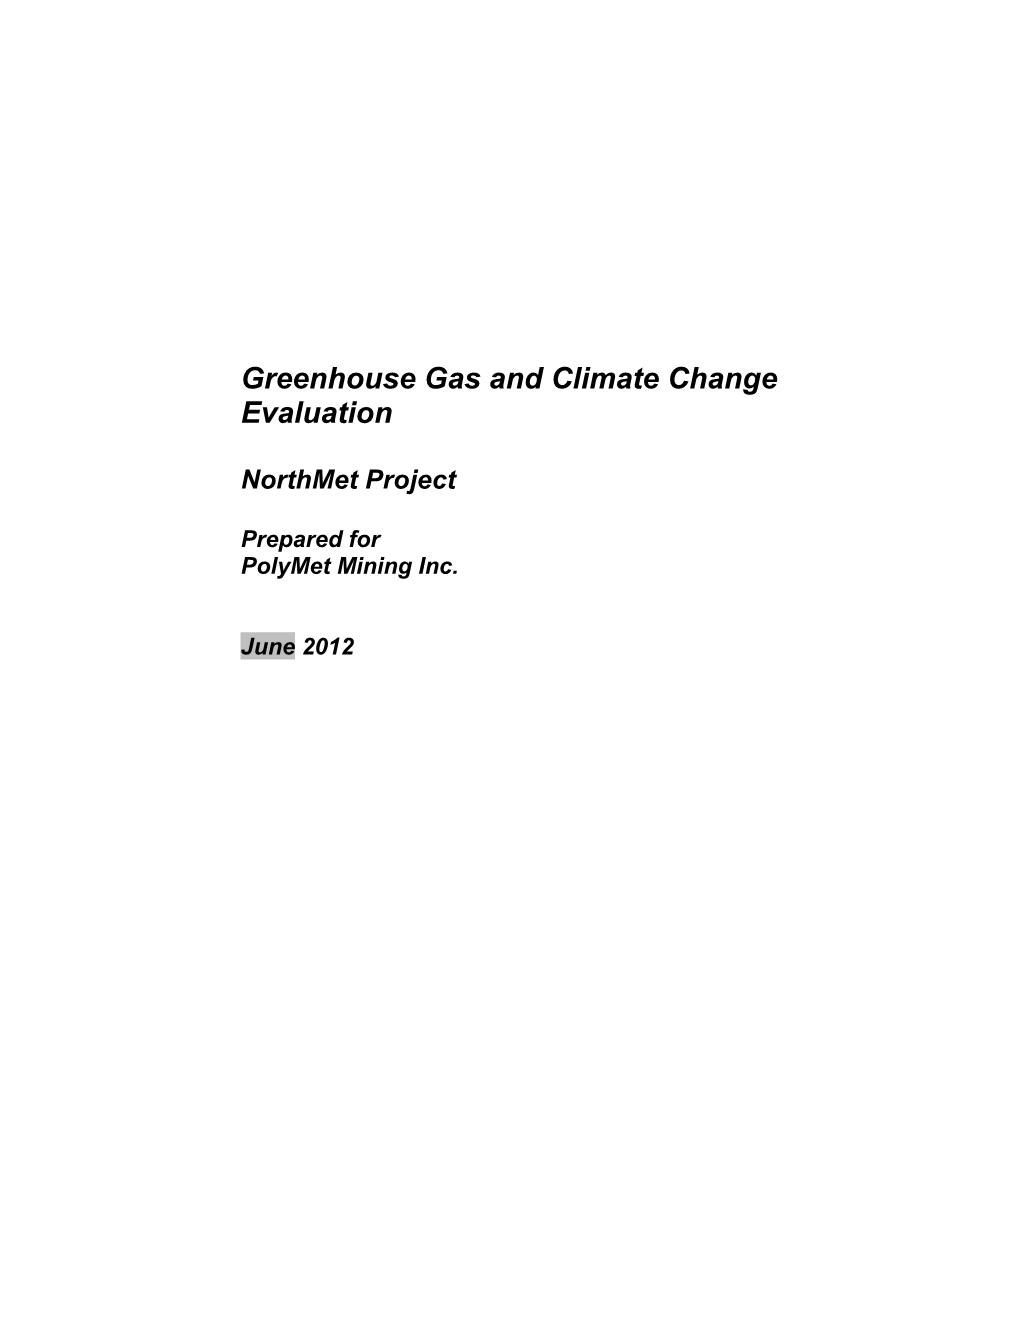 Greenhouse Gas and Climate Change Evaluation